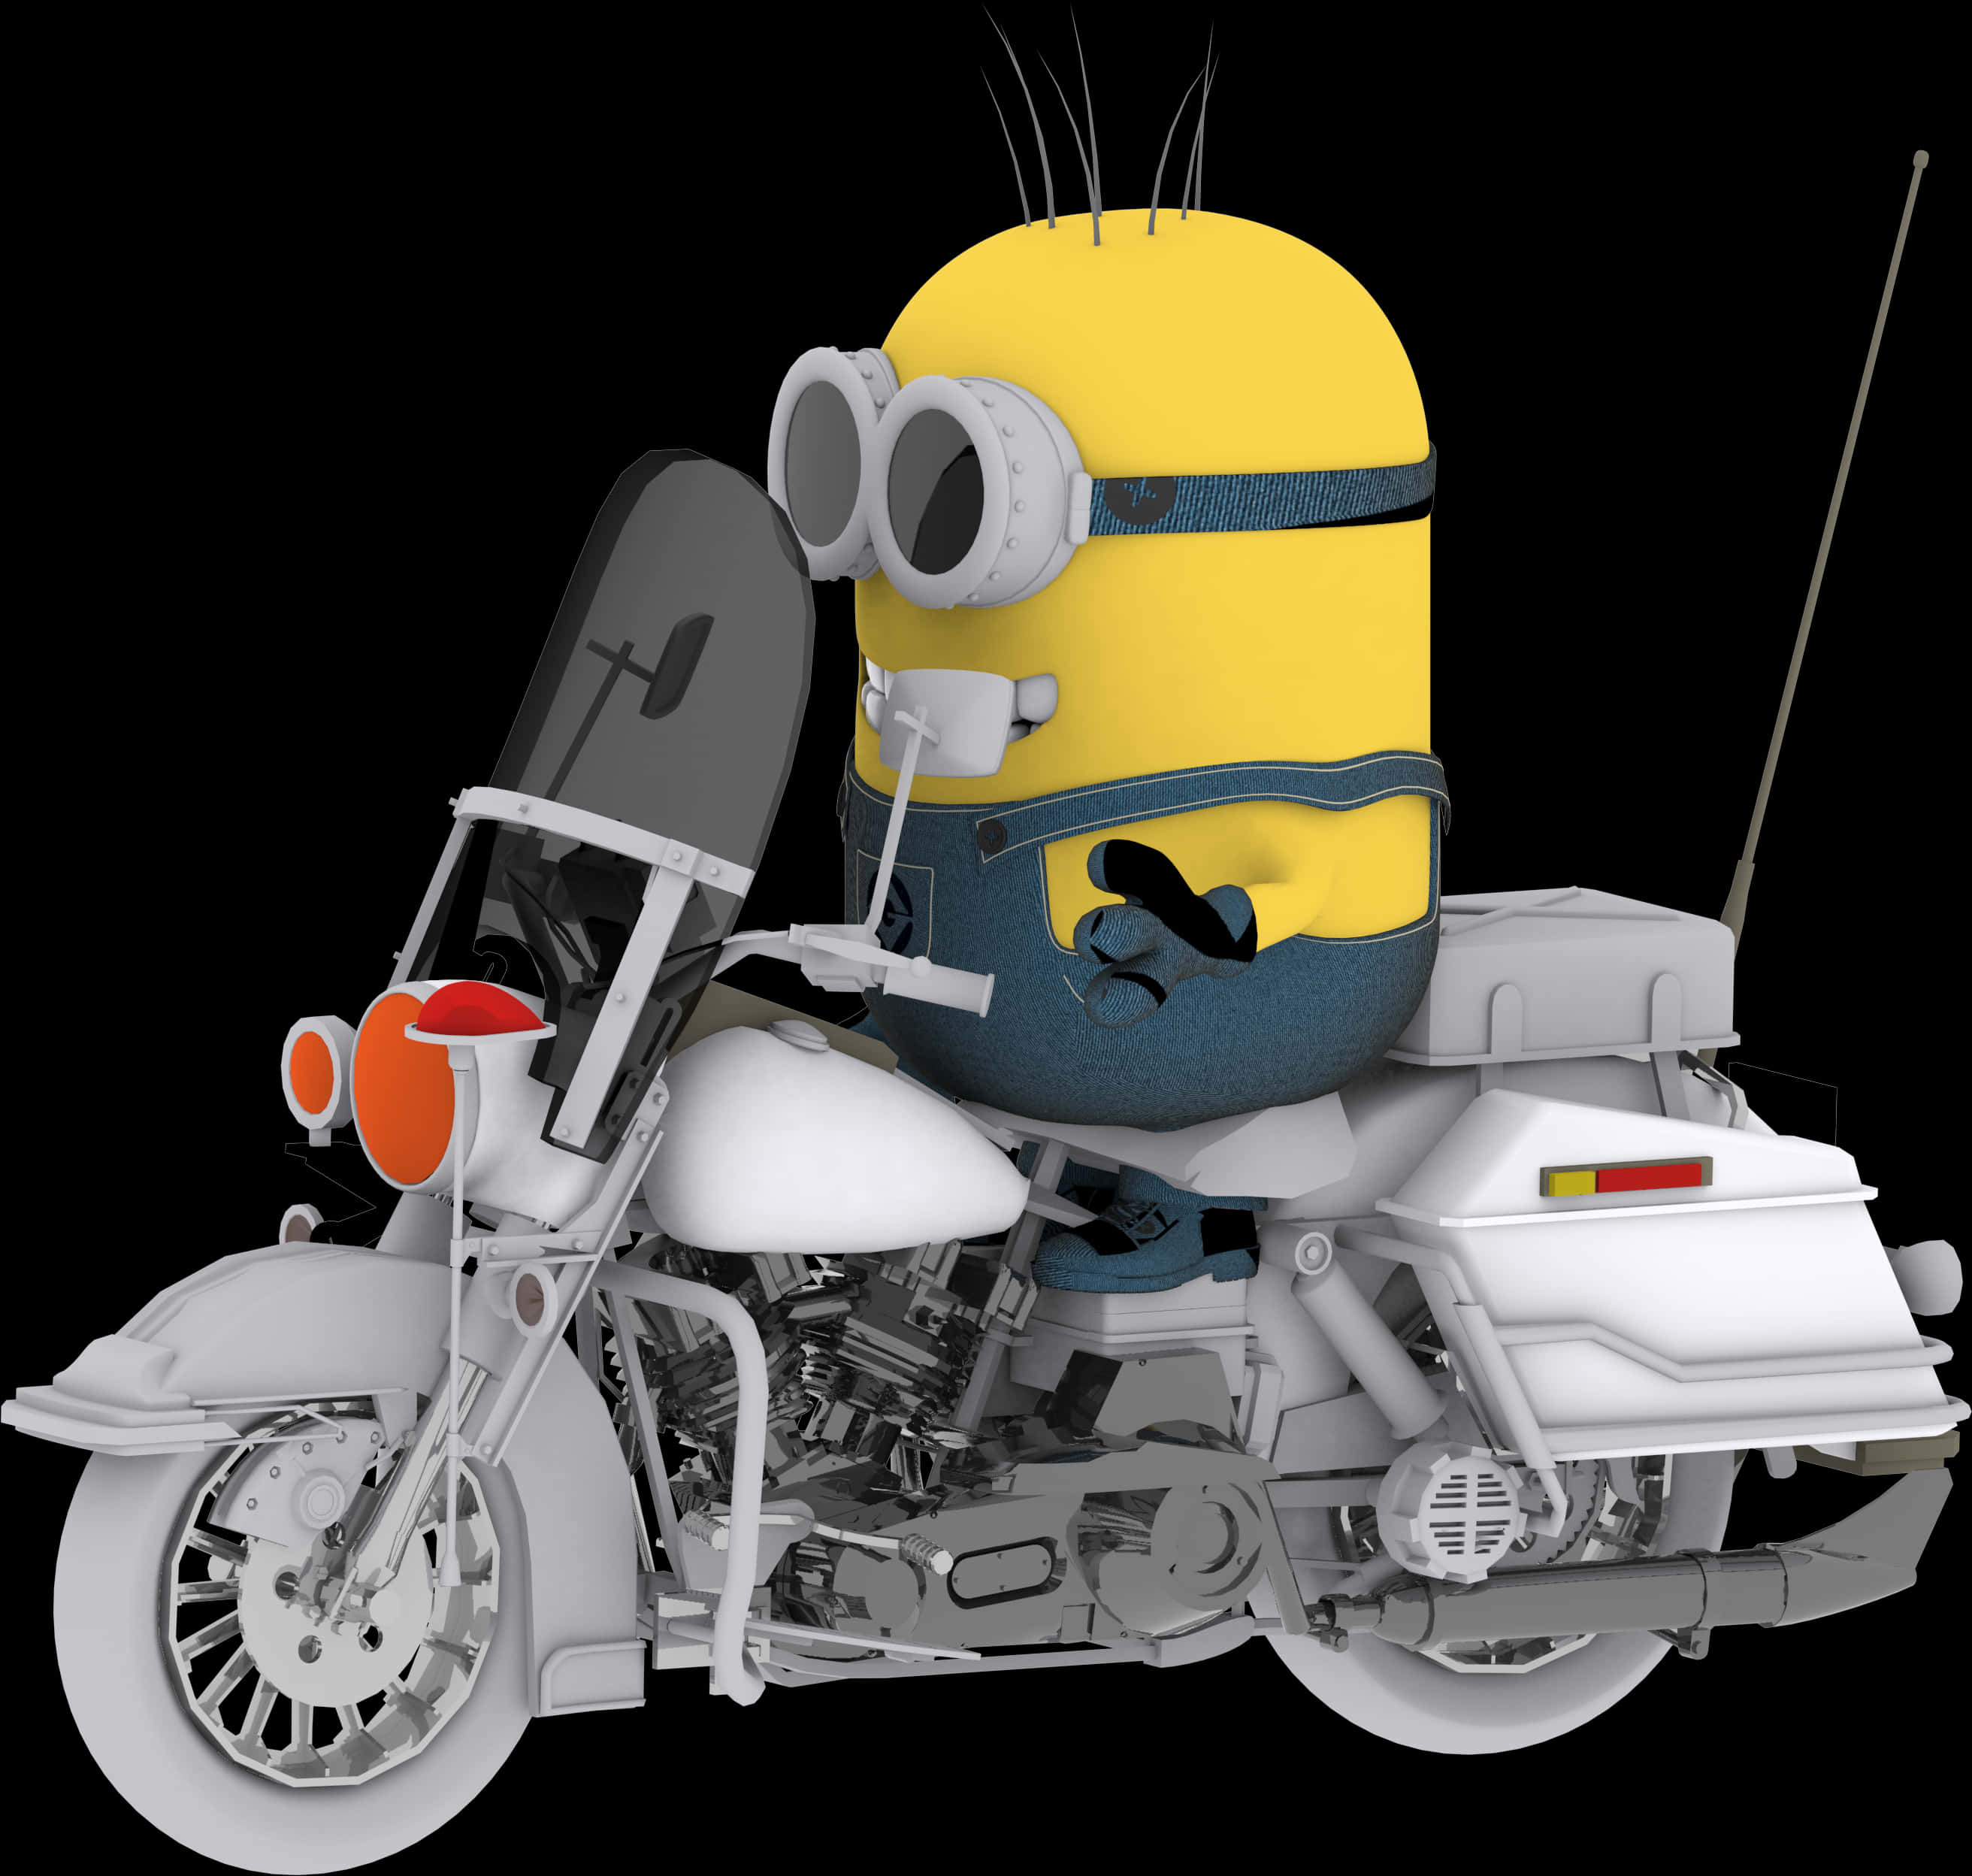 A Cartoon Character On A Motorcycle